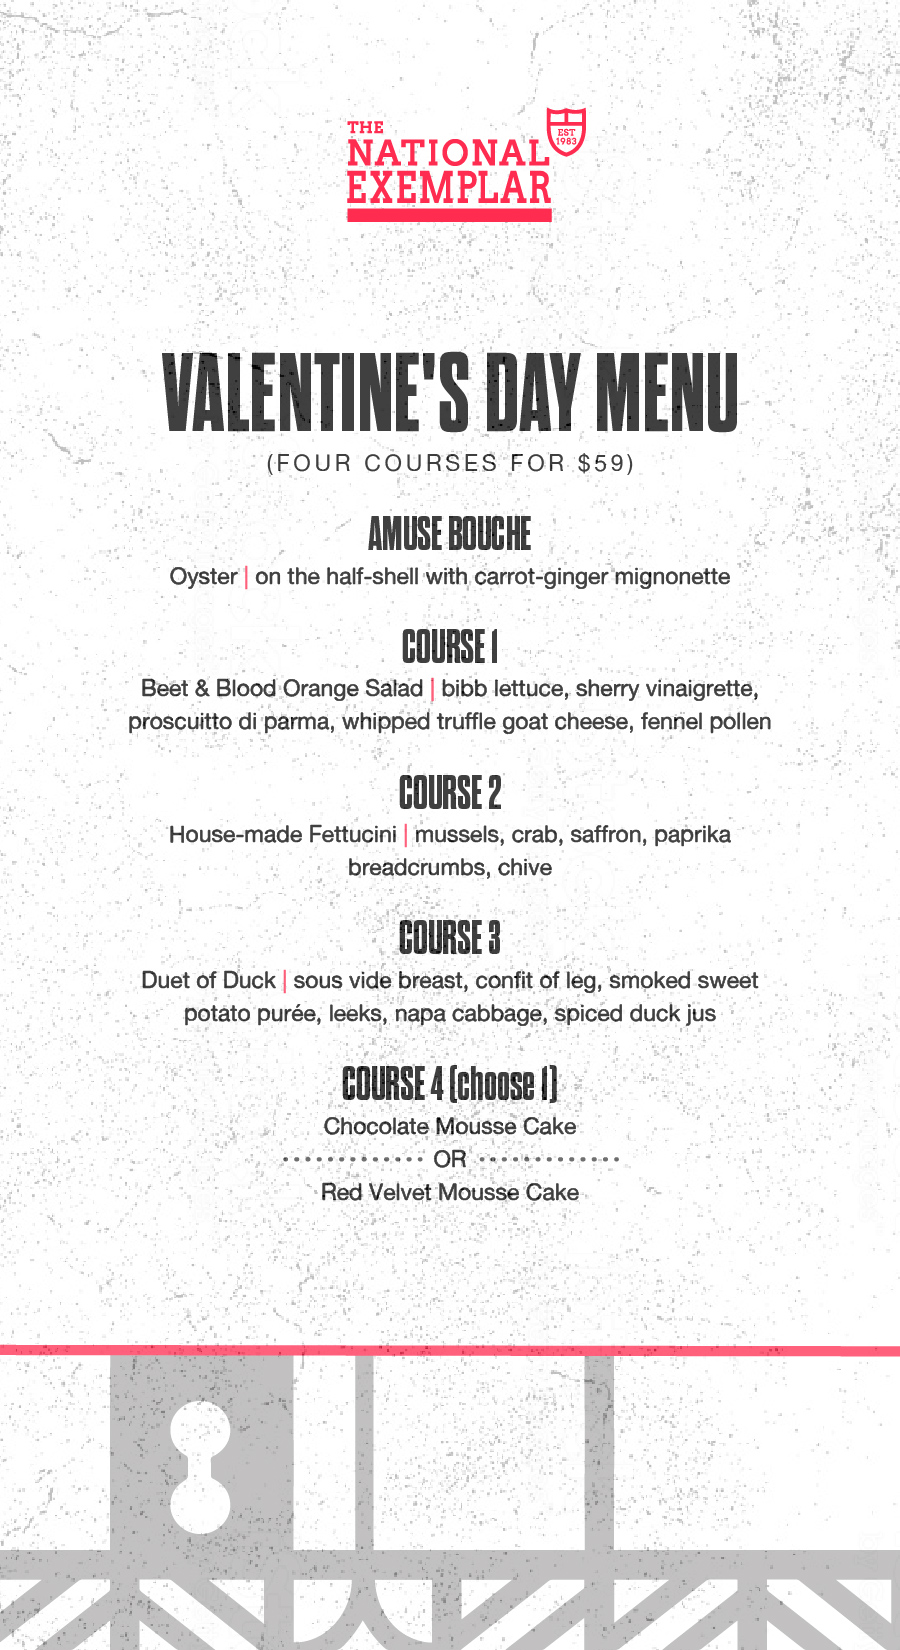 Valentine's Day at The National Exemplar